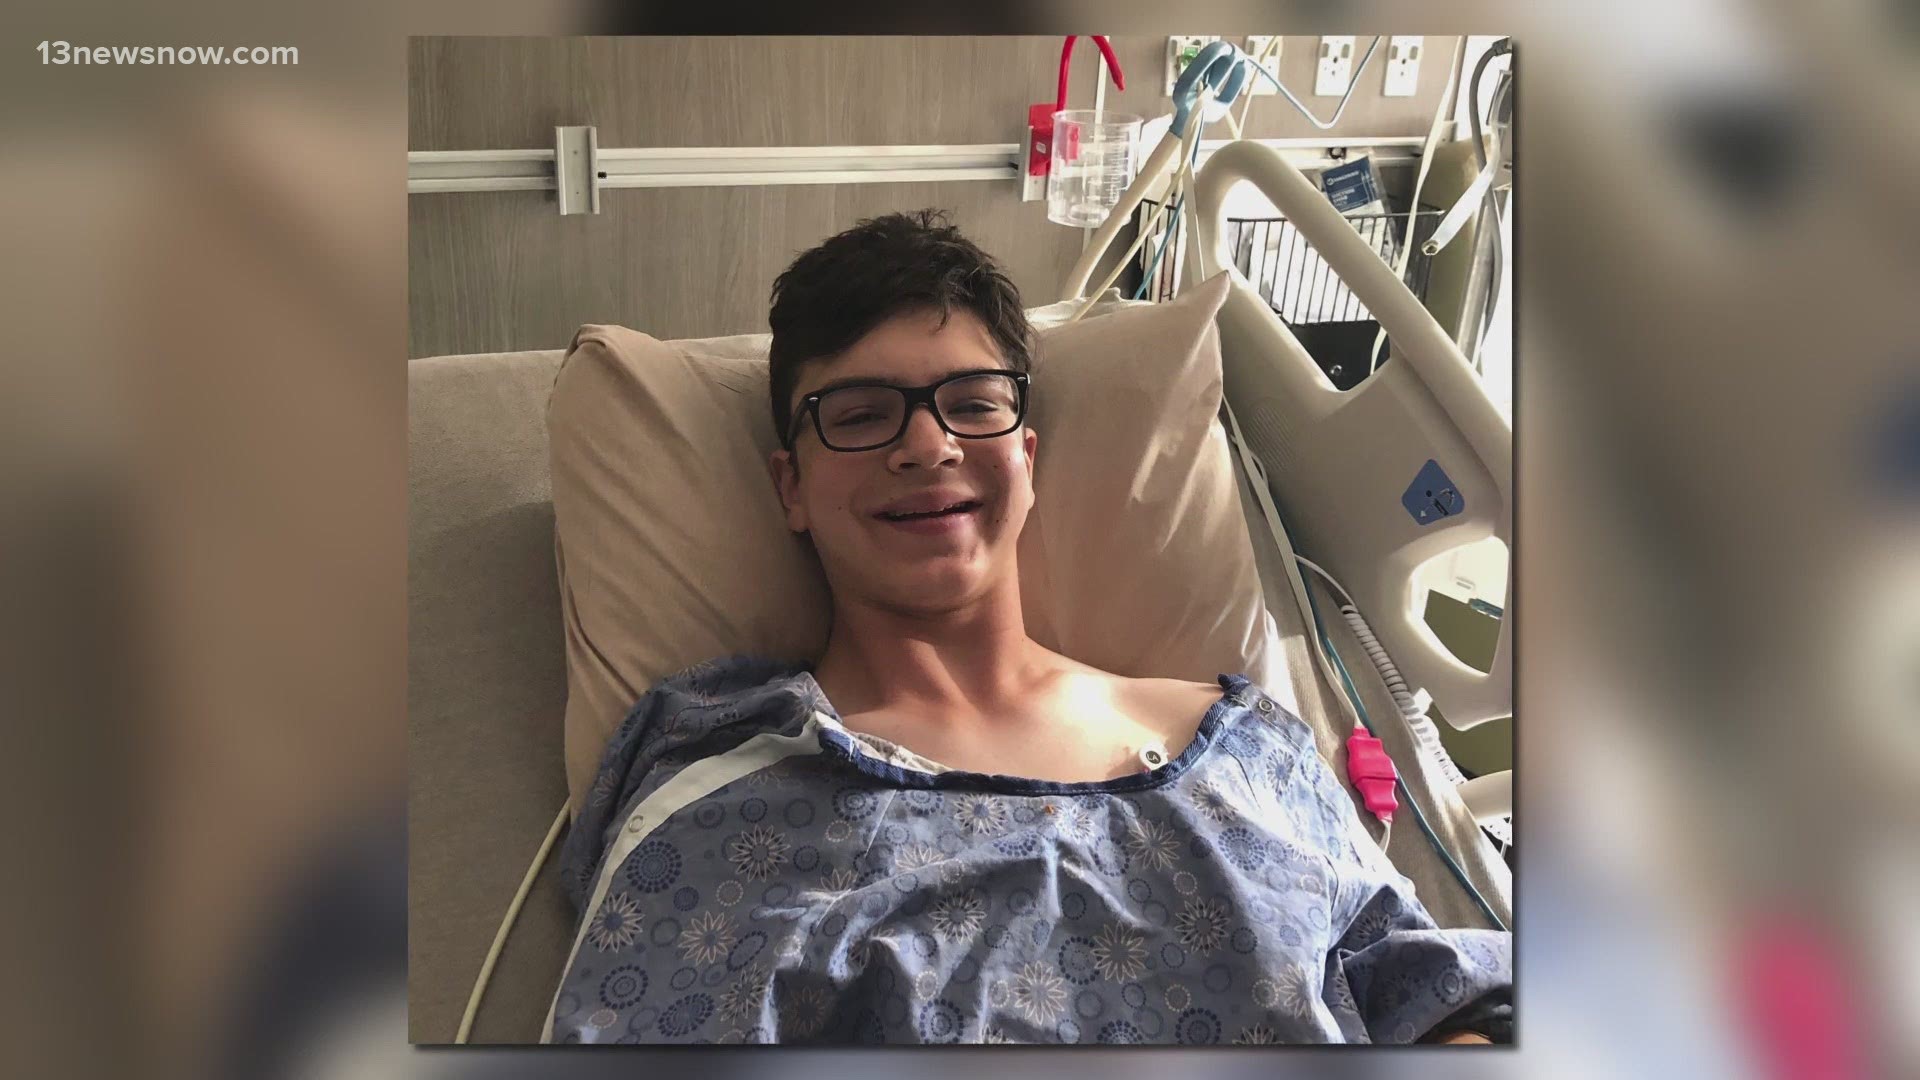 Timmy Anderson is an all-around athlete who loves playing soccer and baseball for Cox High School. Last month, at just 17 years old, he had a stroke.